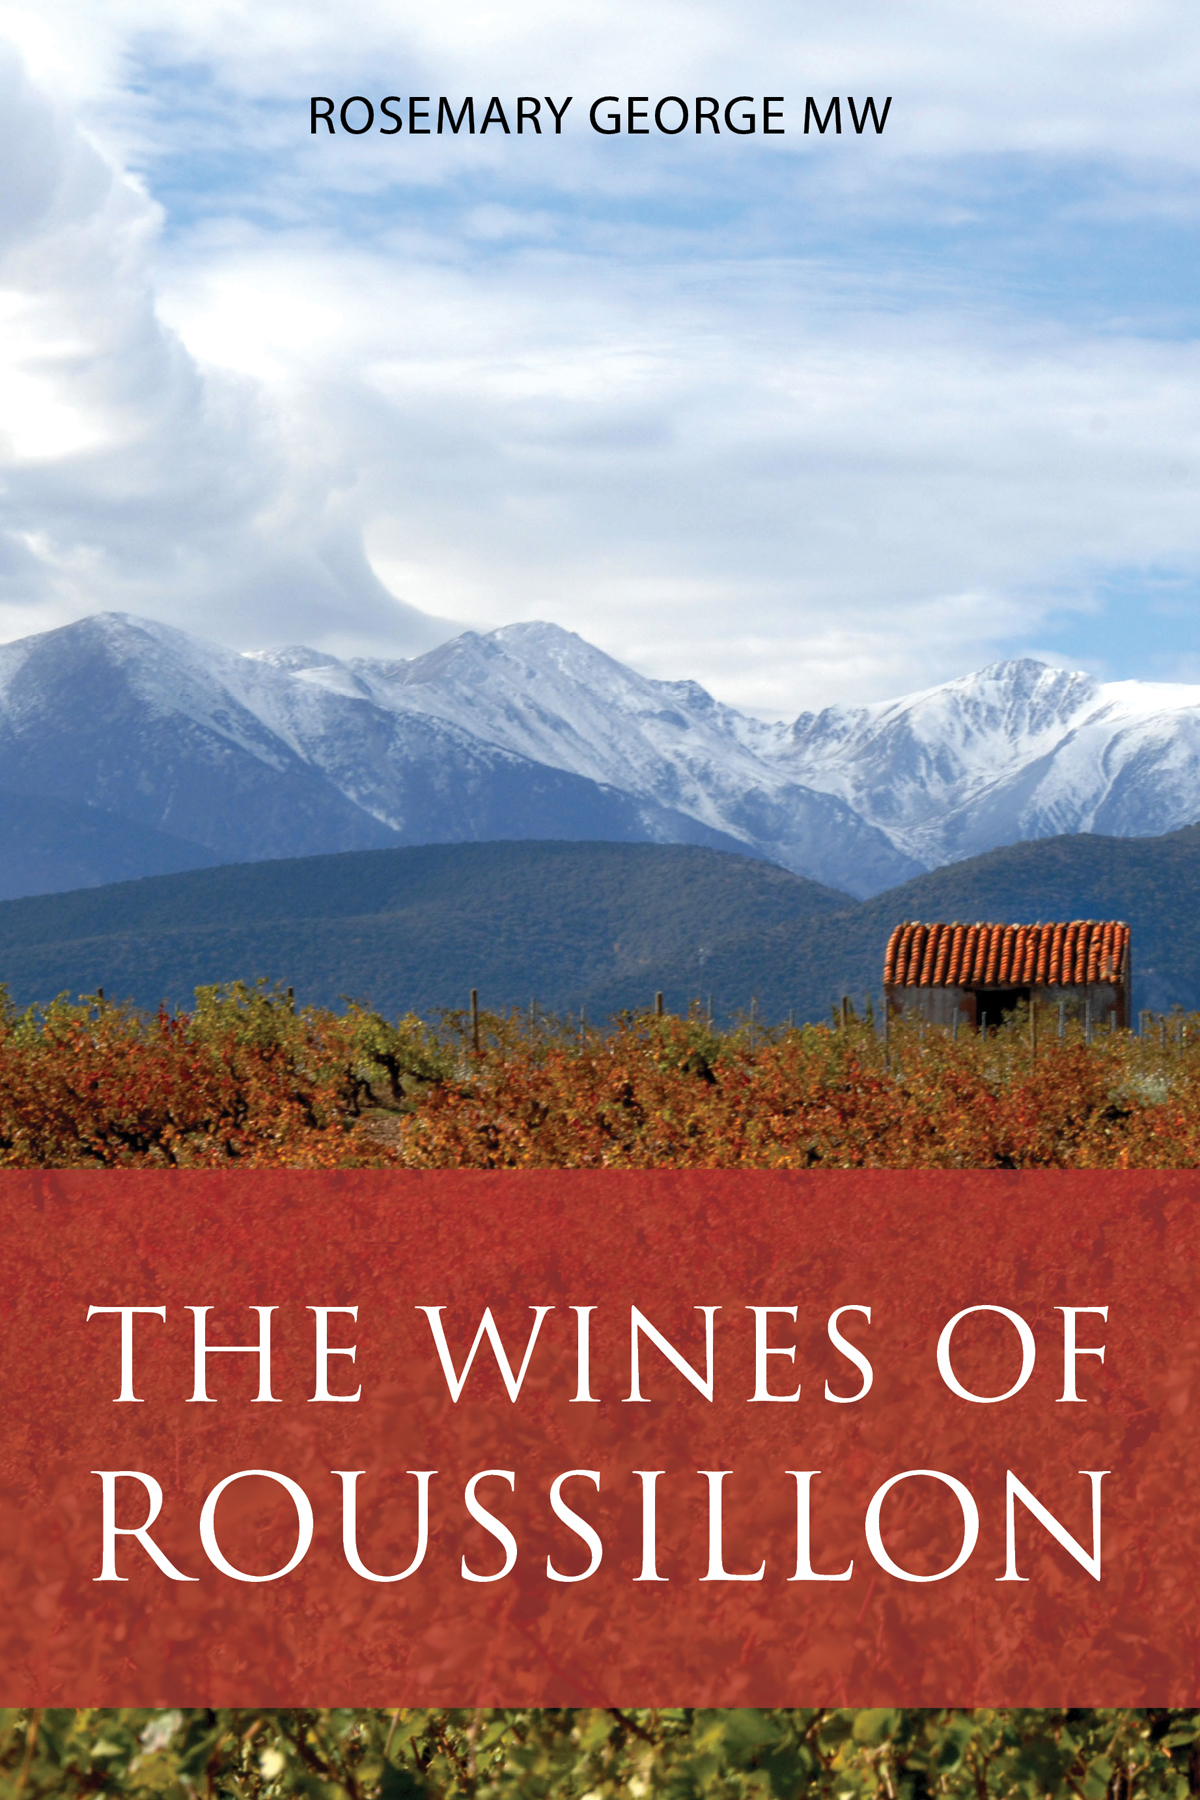 Extract: The wines of Roussillon by Rosemary George MW